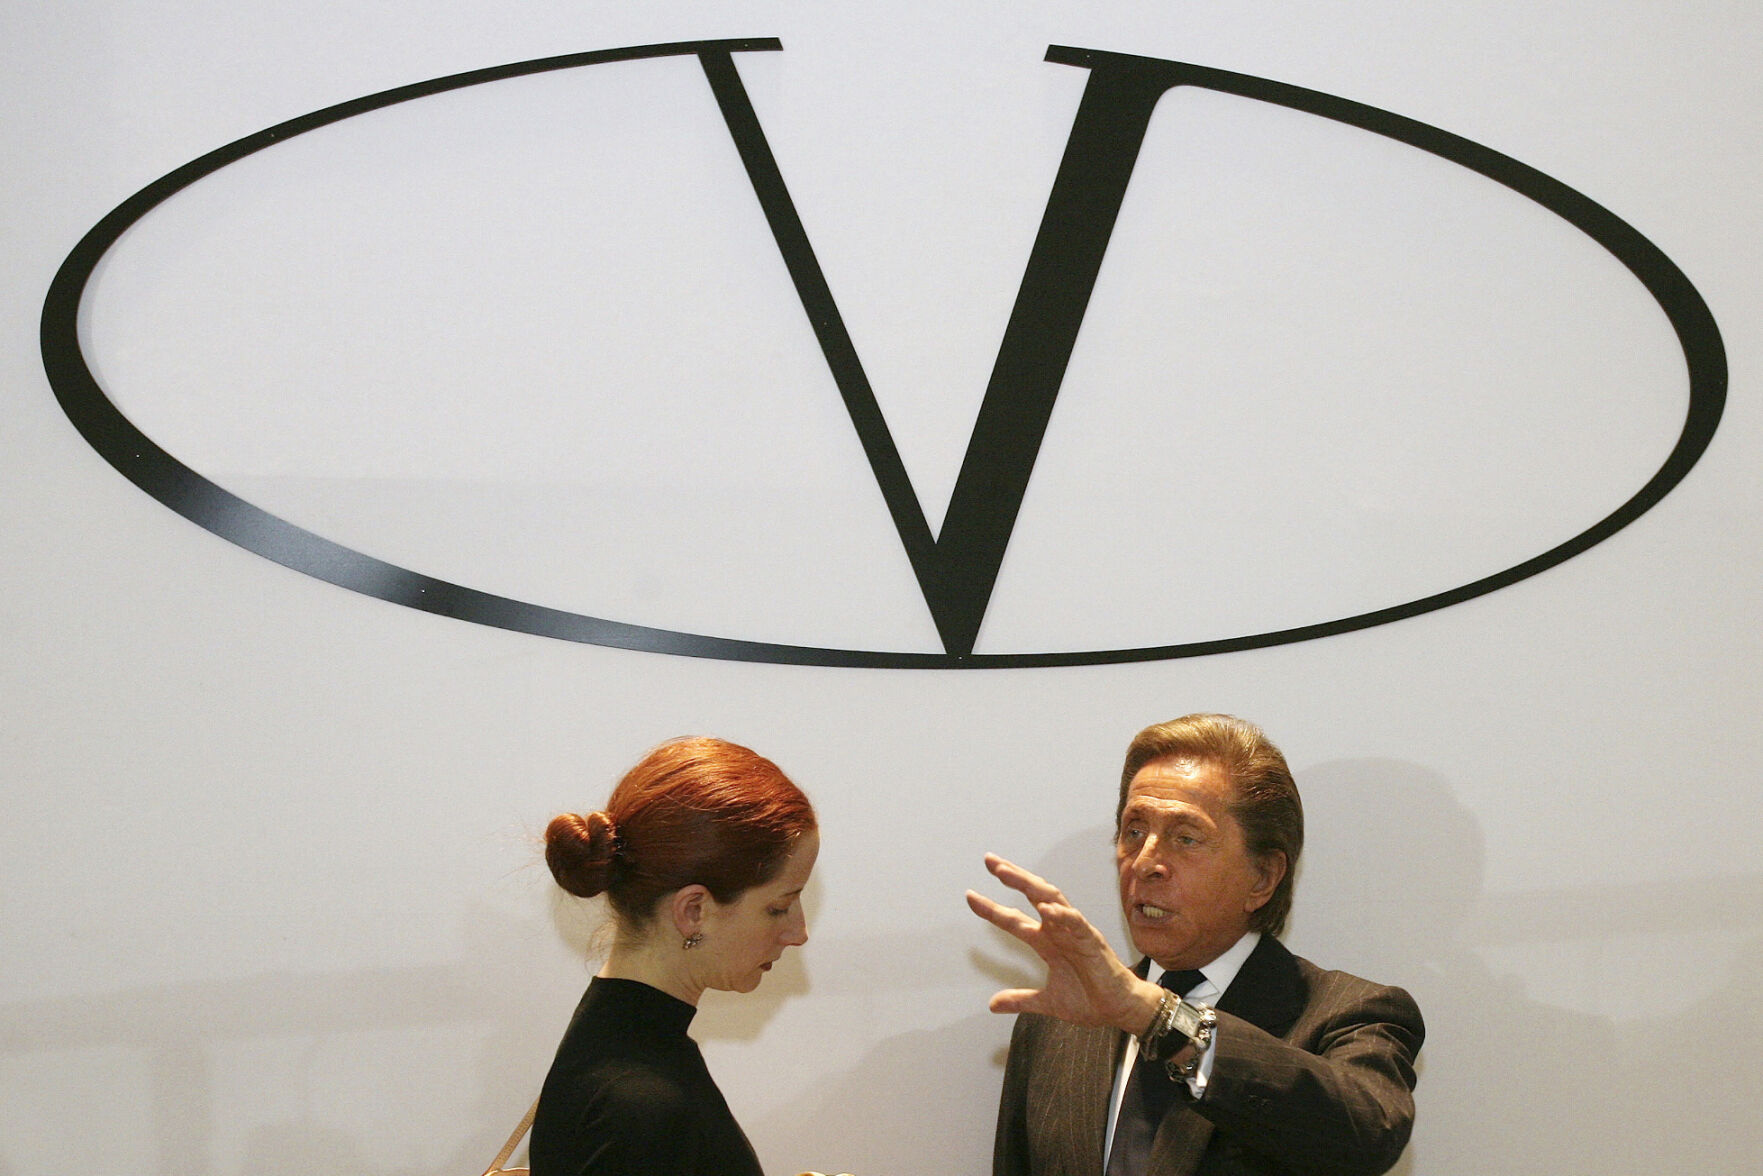 <p>FILE - Italian fashion designer Valentino, right, standing underneath the logo of his fashion house, answers the questions of a fashion reporter prior to the presentation of his Haute Couture Spring-Summer 2008 fashion collection, on Jan. 23, 2008, in Paris. French luxury conglomerate Kering has reached a cash deal to purchase a 30% stake in Italian fashion house Valentino for 1.7 billion euros from a Qatari investment firm. (AP Photo/Thibault Camus, File)</p>   PHOTO CREDIT: THIBAULT CAMUS